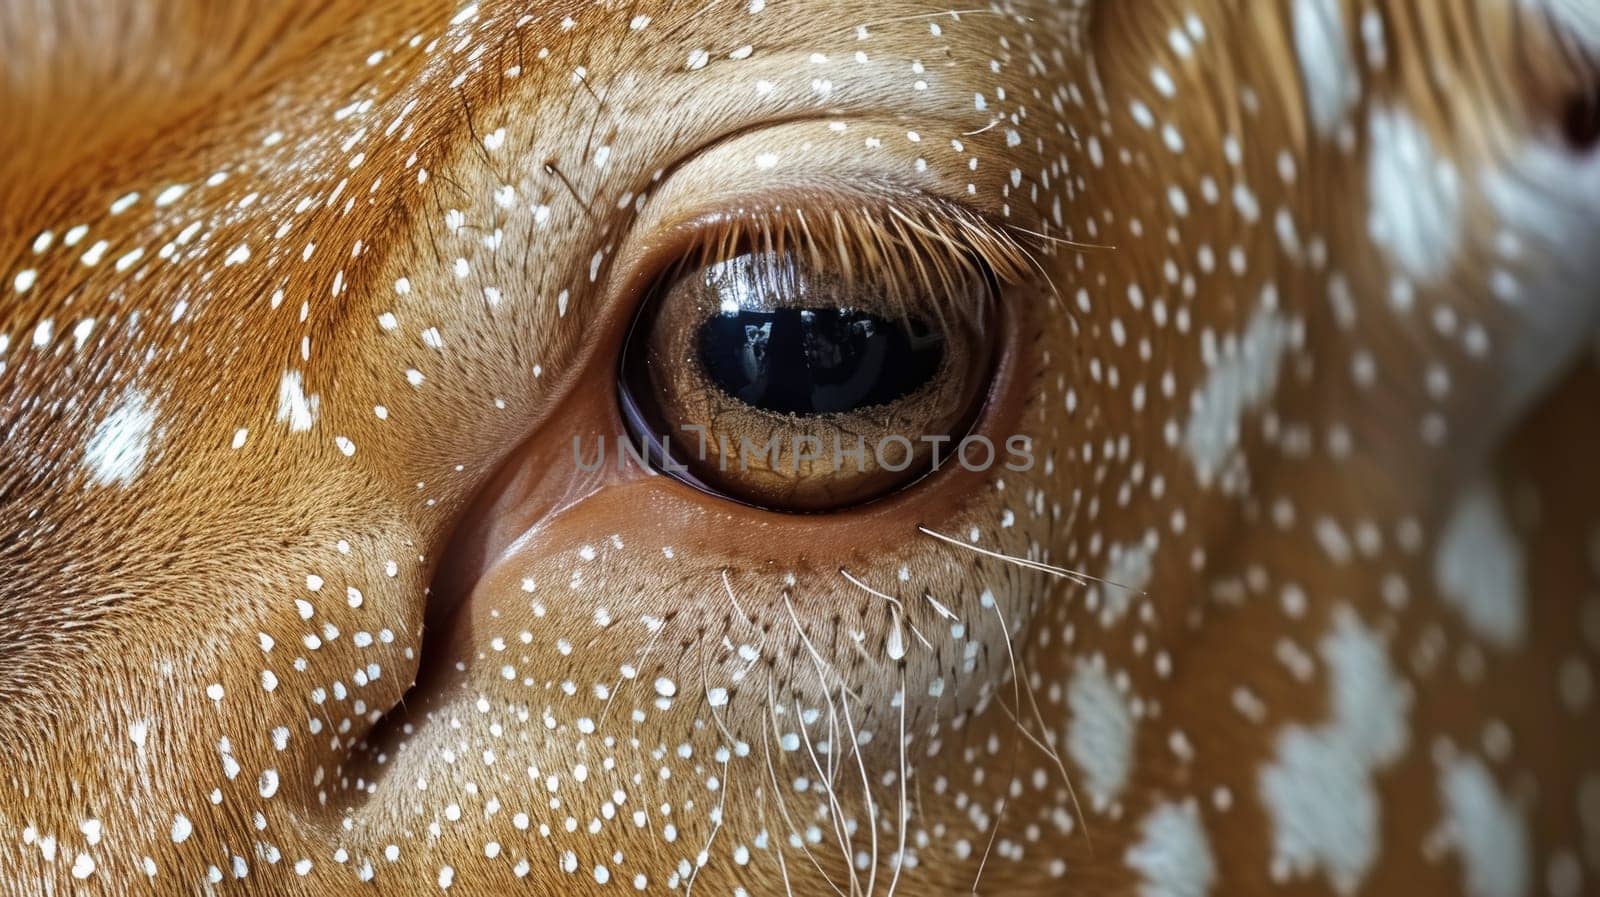 A close up of a brown spotted deer's eye with white spots